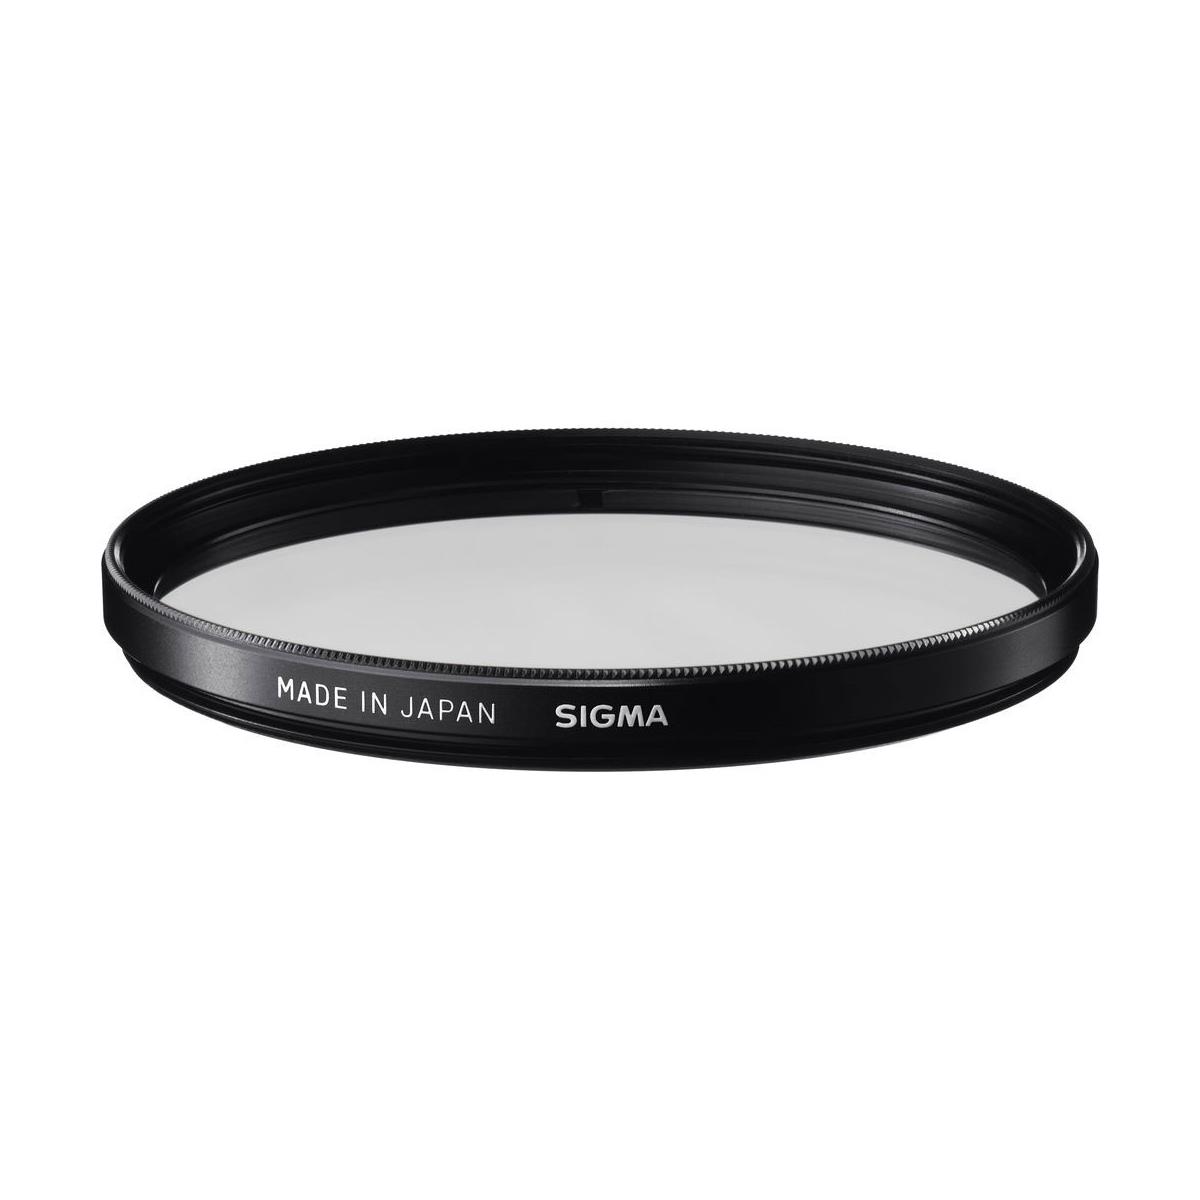 Sigma 52mm WR UV Filter - Water & Oil Repellent & Antistatic 12ml liquid balm bite mosquito repellent oil fengyoujing cool repellent insect oil refreshing anti itch mosquito repellent tools